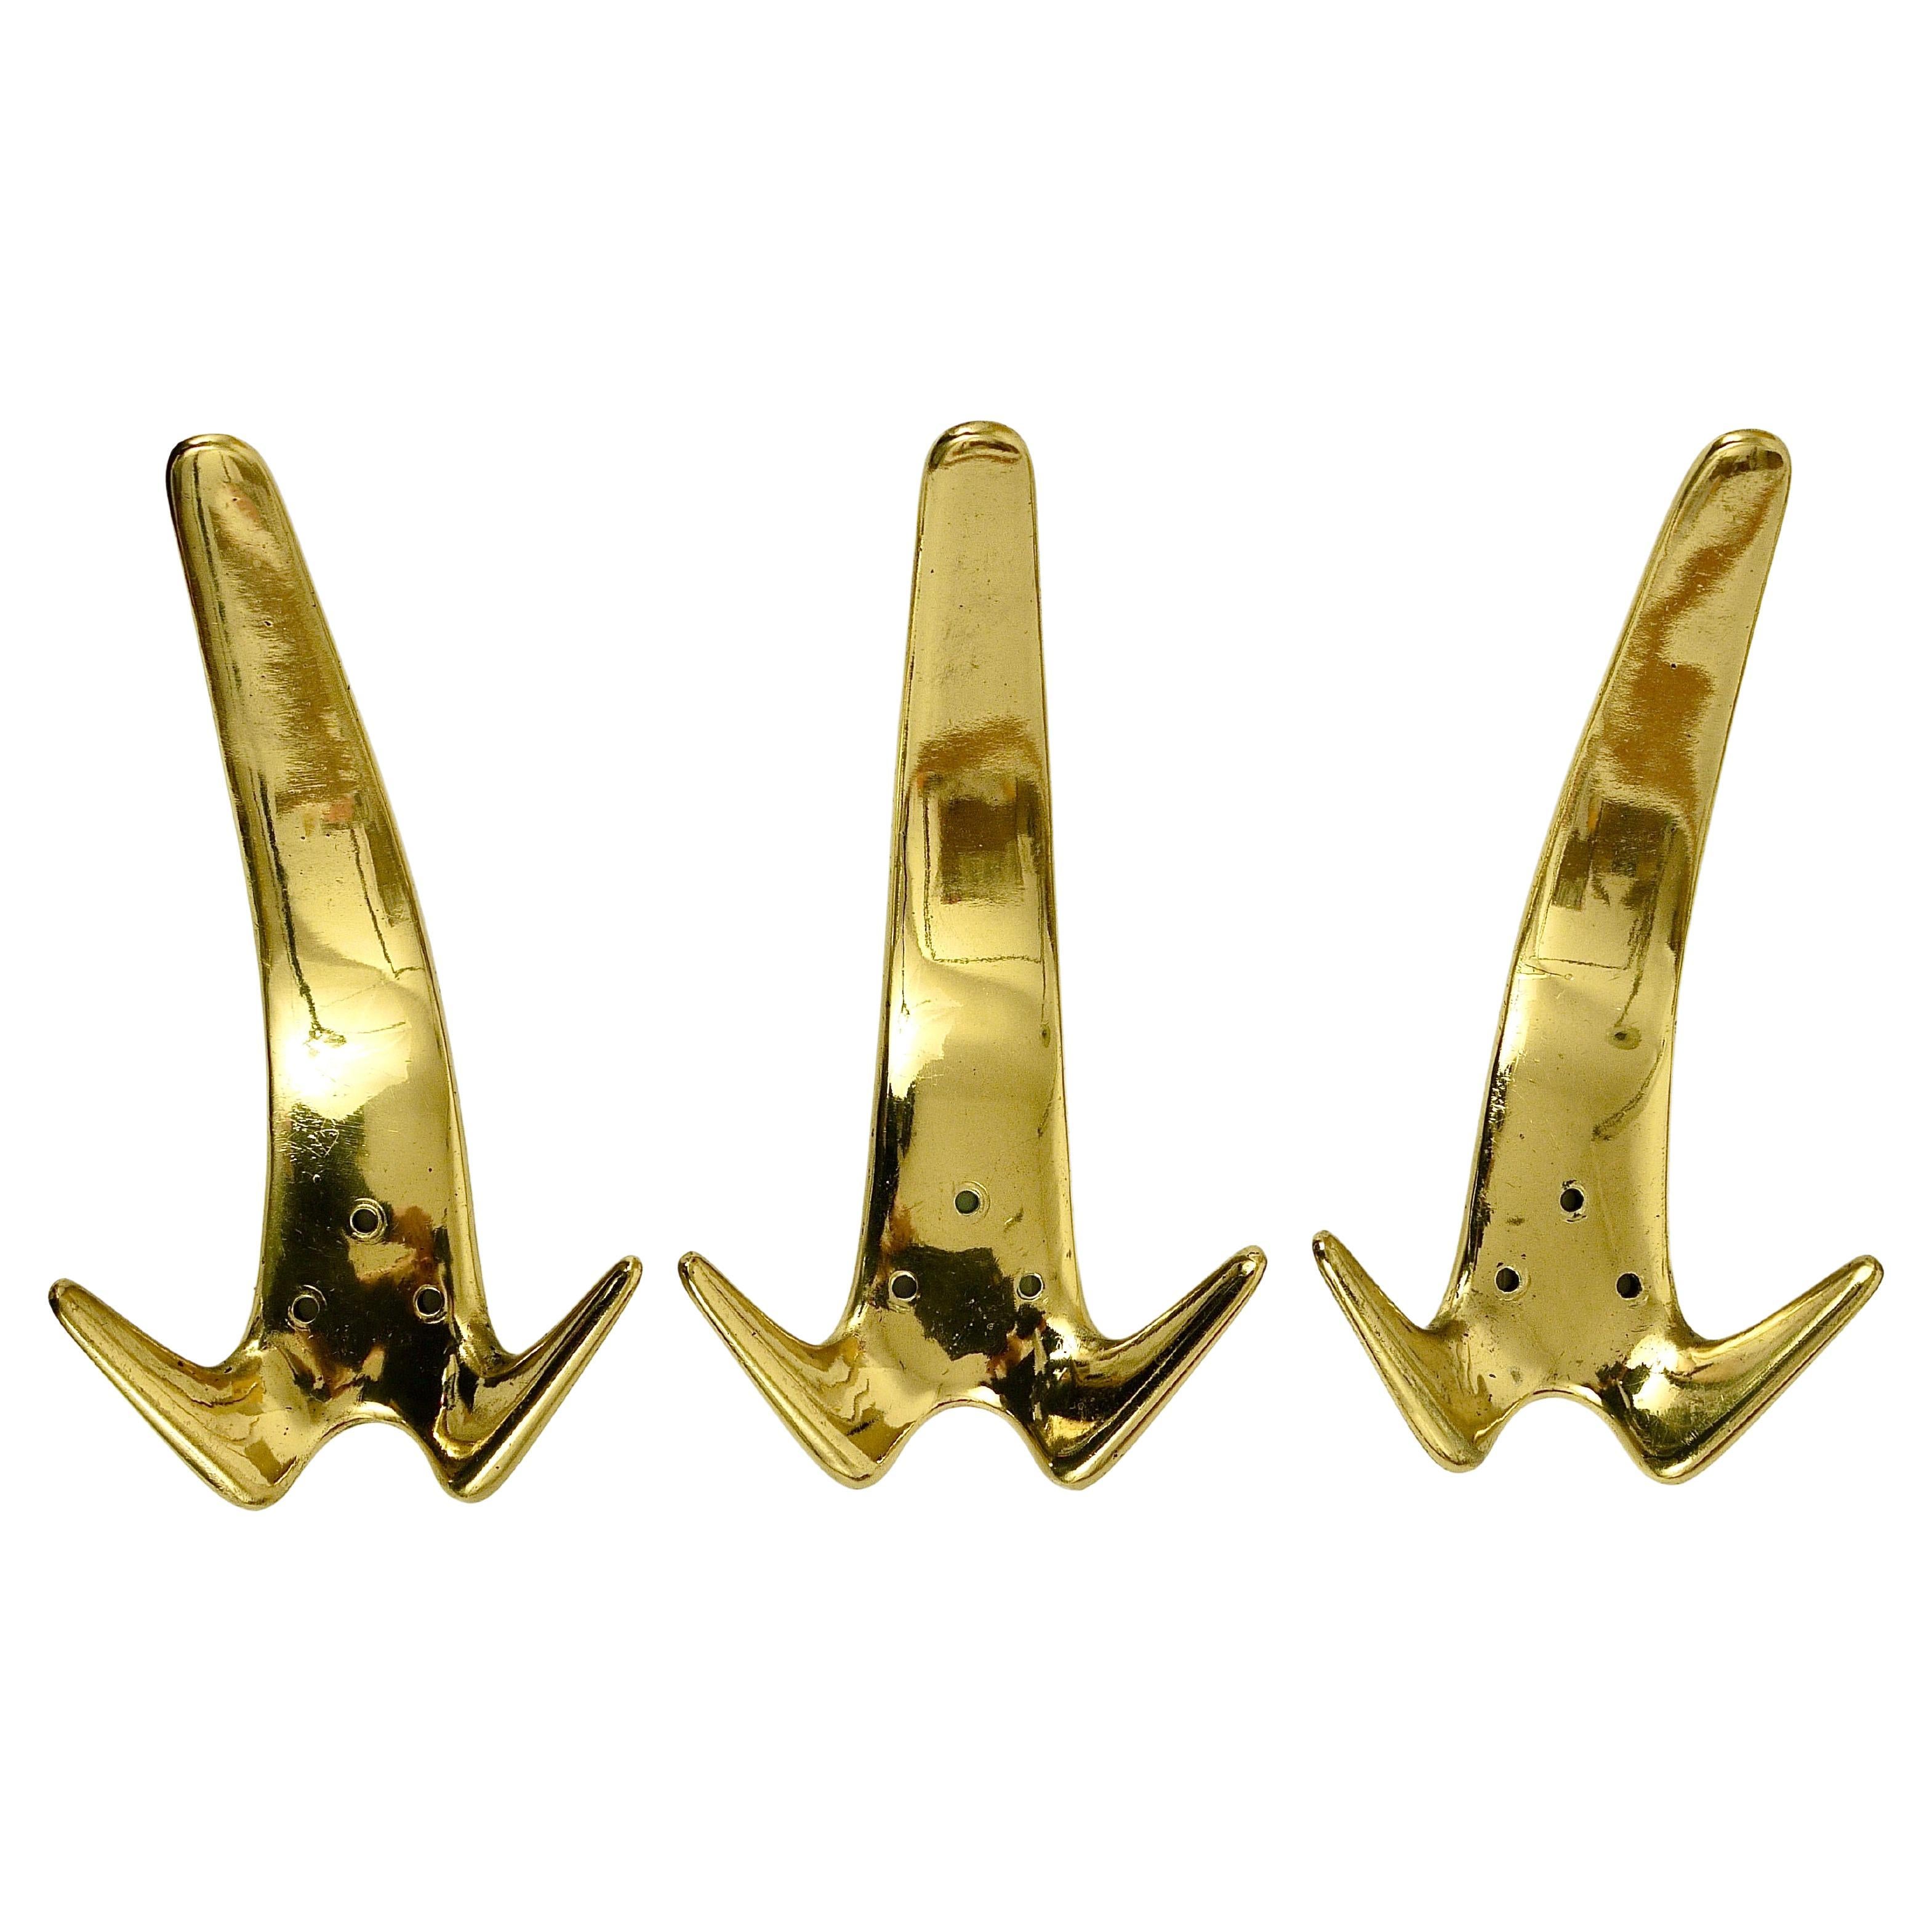 Up to Five Carl Aubock Large Brass Double Wall Coat Hooks #4056, Austria, 1950s For Sale